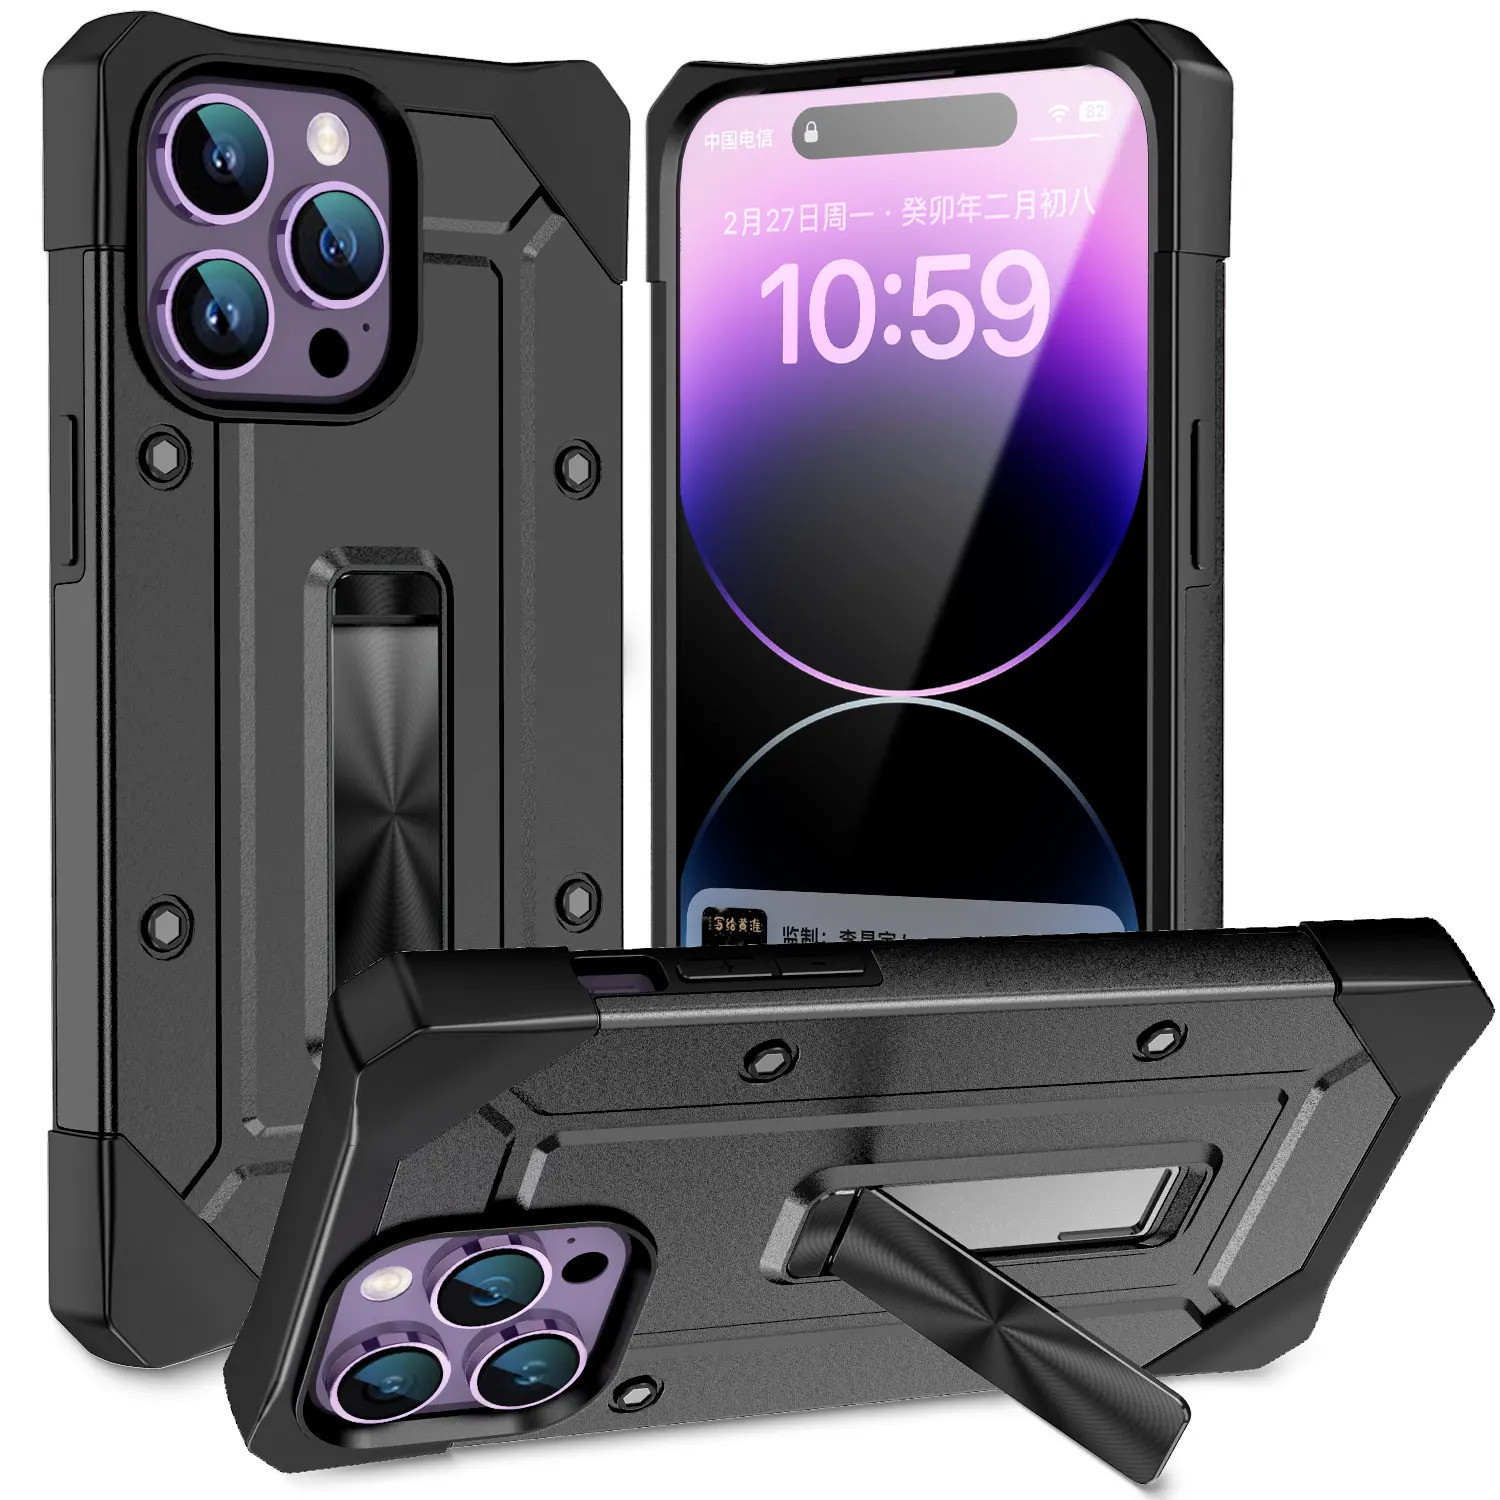 Cell Phone Case For Google Pixel 6 6A 7 7Pro fancy iphone 14 pro max cases Armor Rugged Shockproof kickstand Back Cover